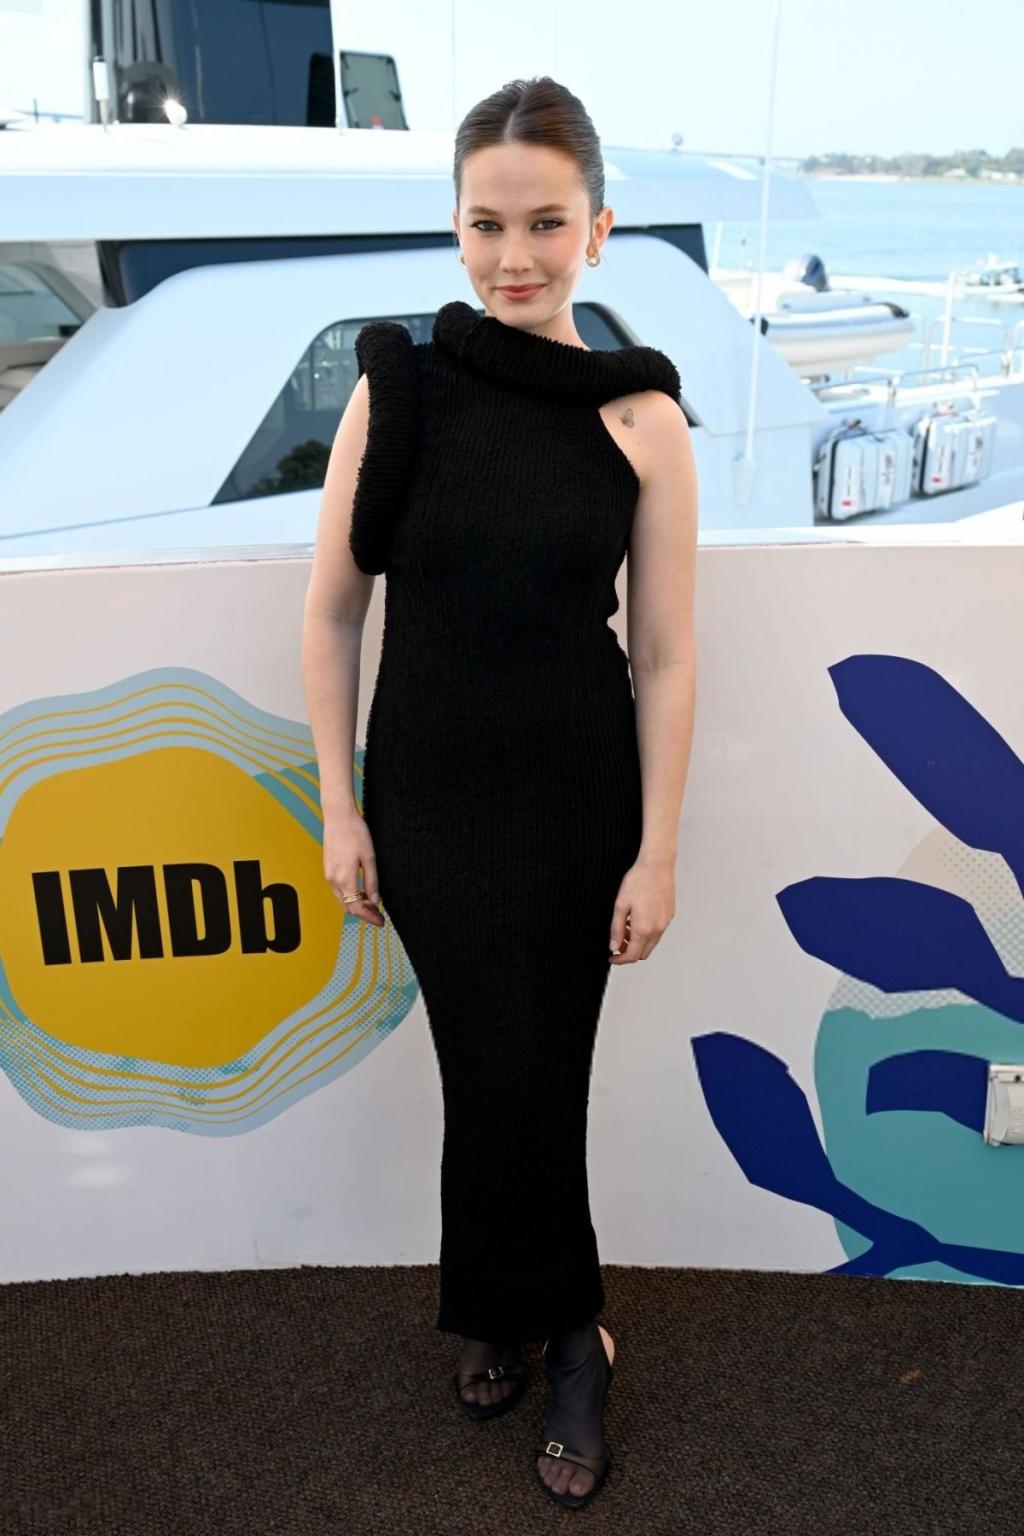 cailee-spaeny-at-imdboat-at-comic-con-2024-in-san-diego-07-26-2024-3.jpg